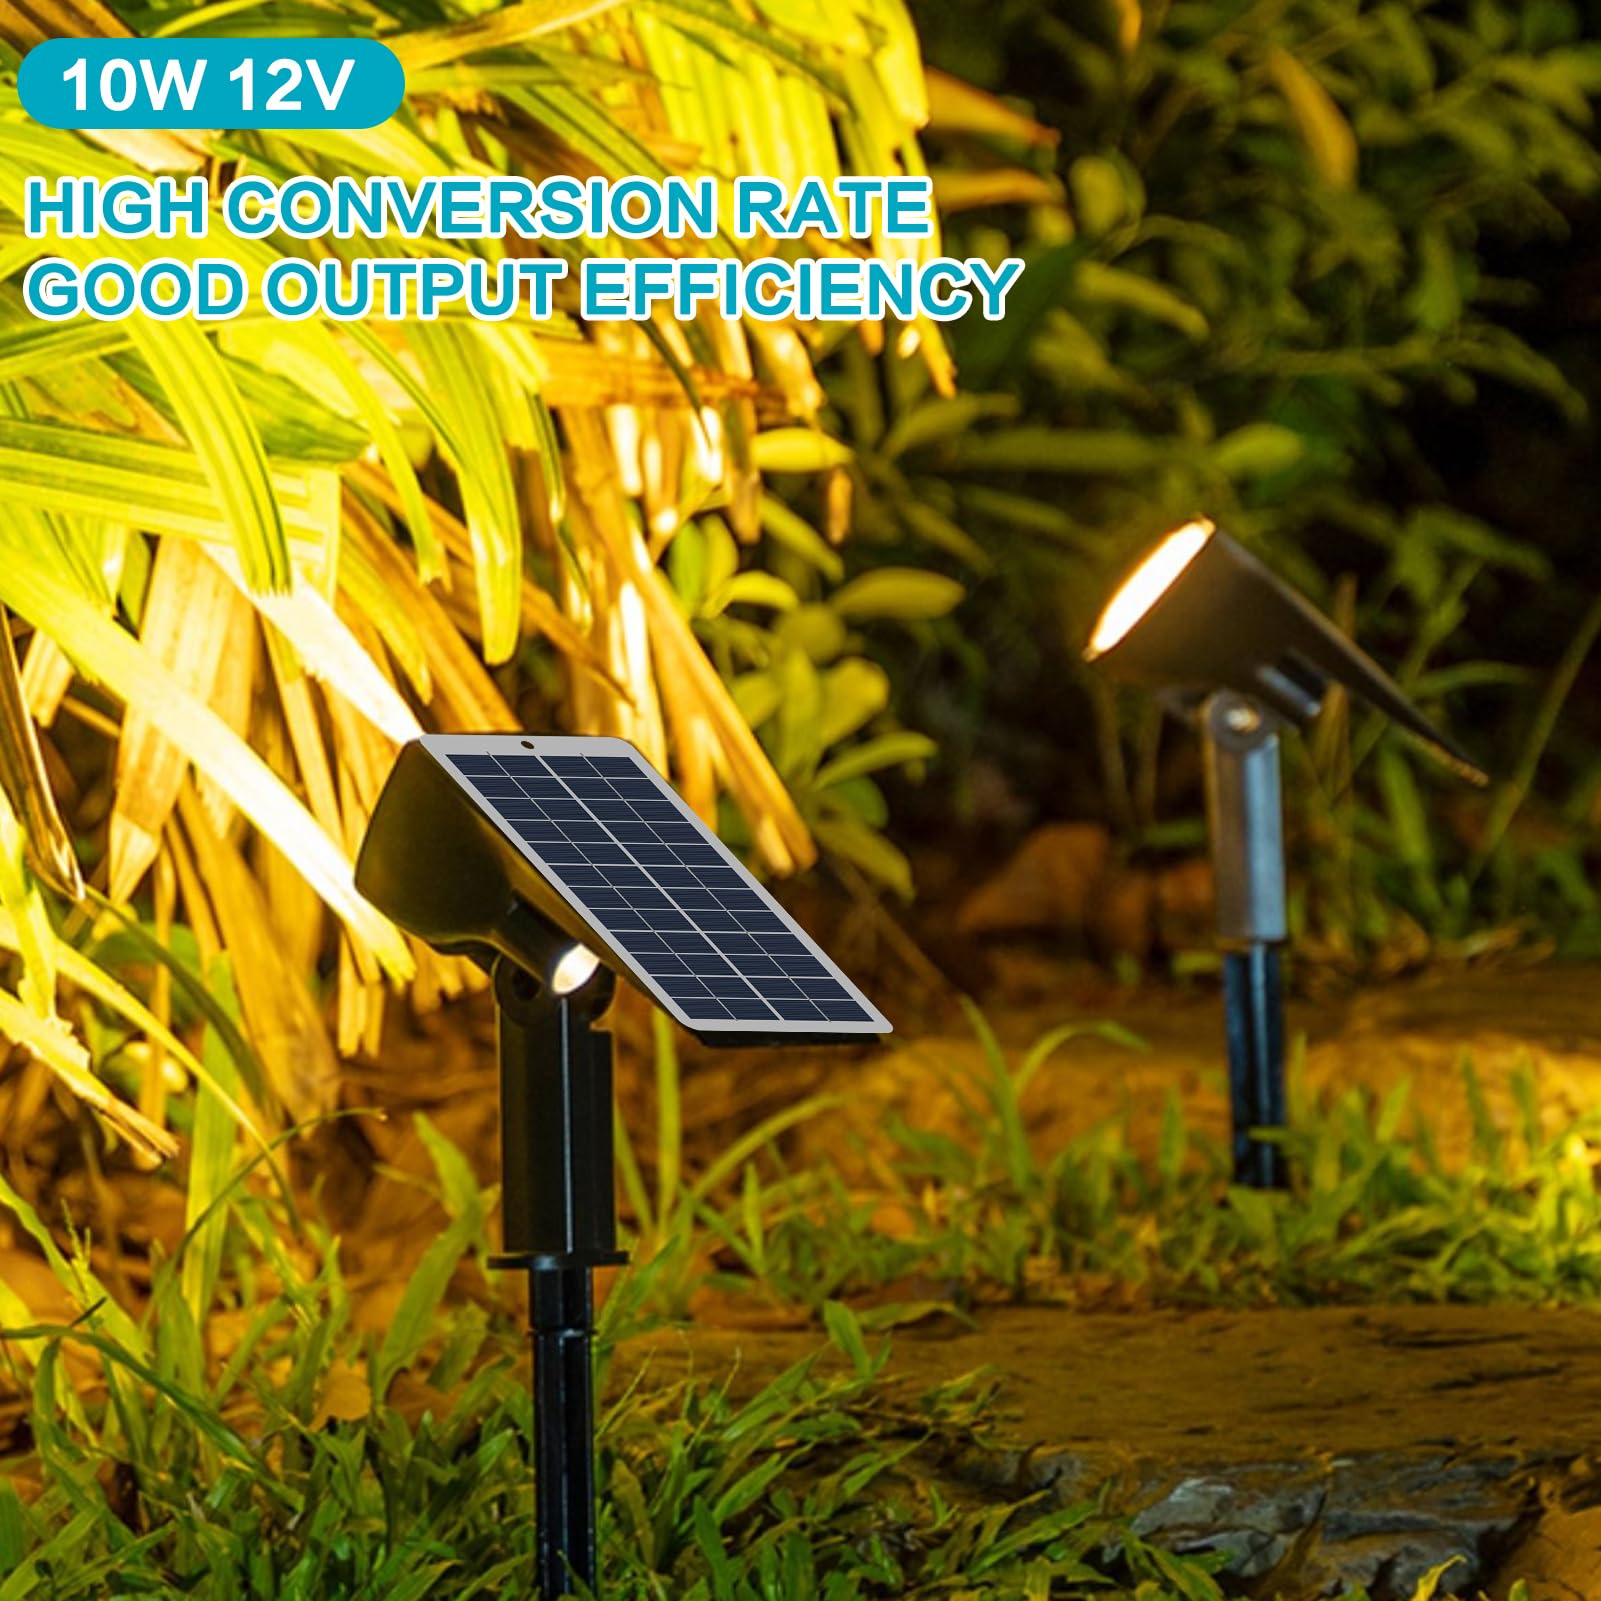 Maxmartt Portable Solar Panel Charger Kits 10W 12V Solar Battery Trickle Charger Maintainer Solar Cells Battery Charger DC Connector for Outdoor Lights Camping